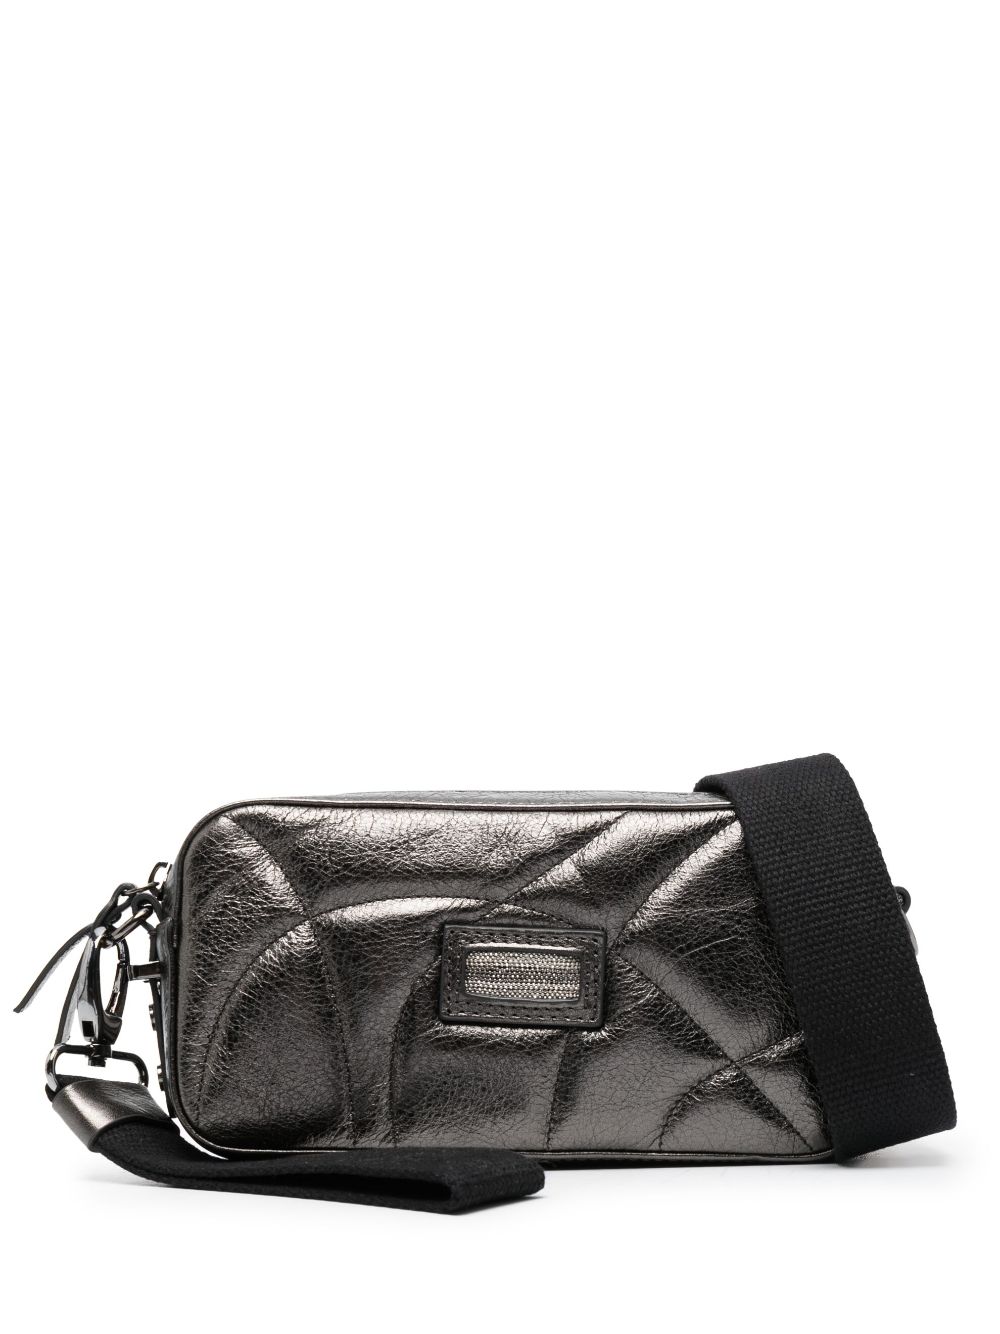 quilted-finish leather crossbody bag